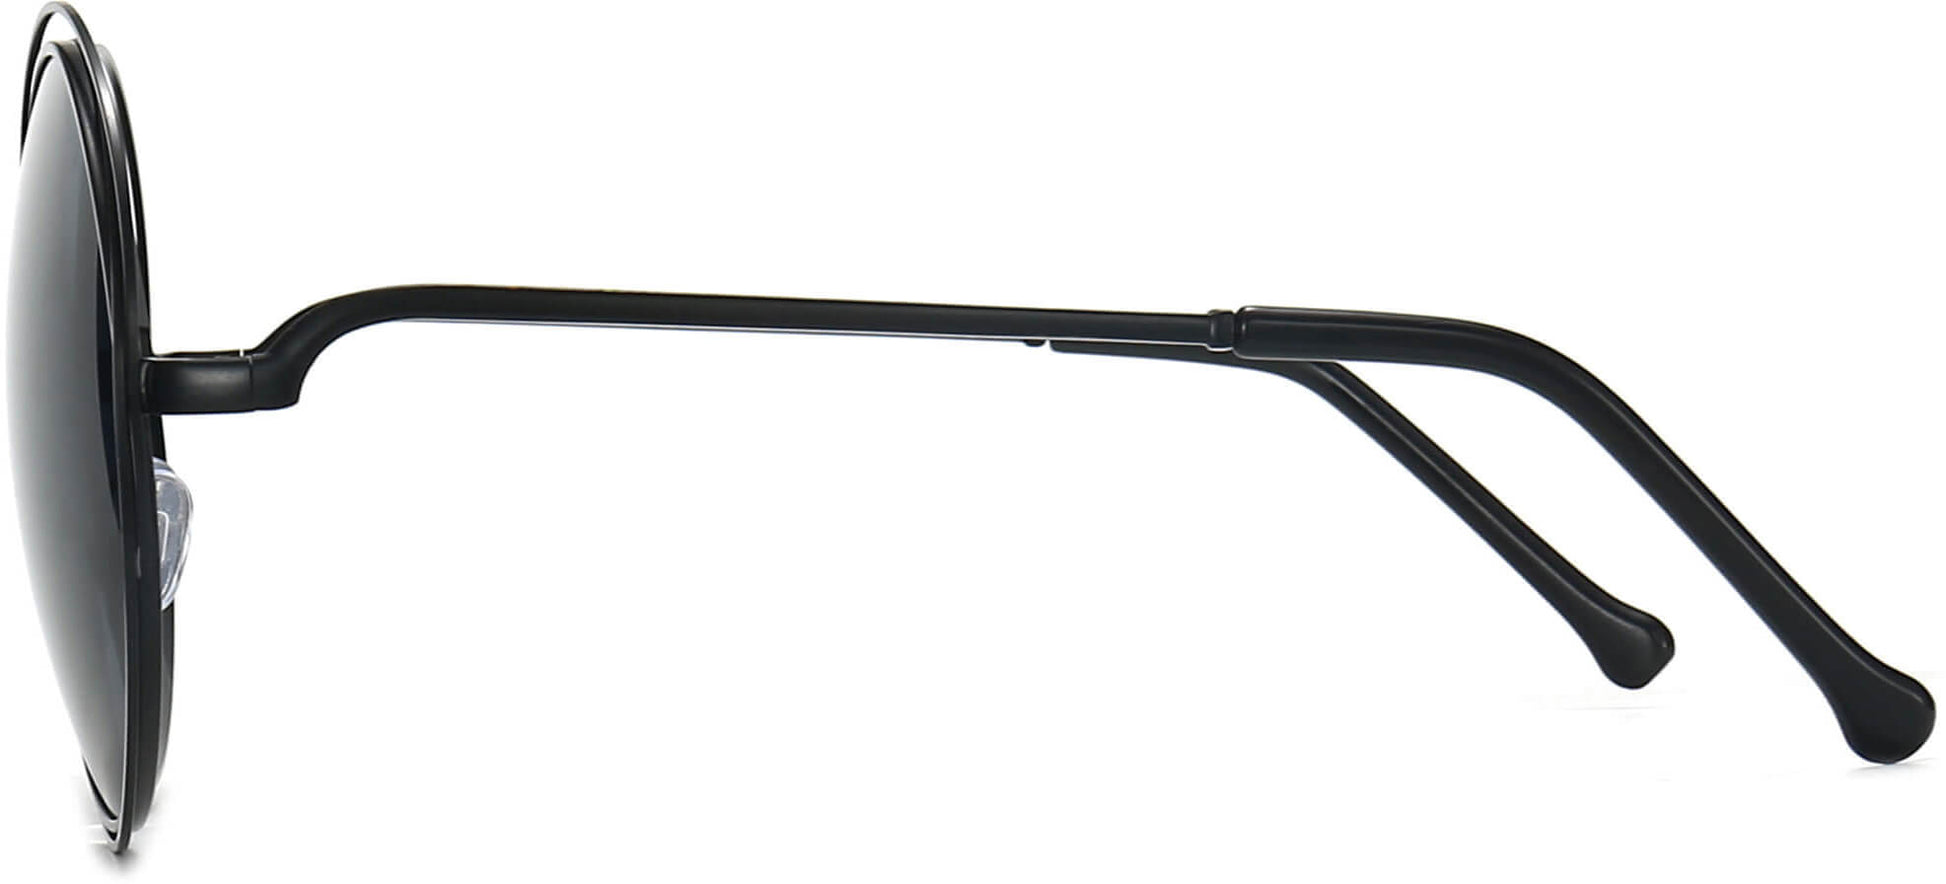 Cecilia Black Stainless steel Sunglasses from ANRRI, side view